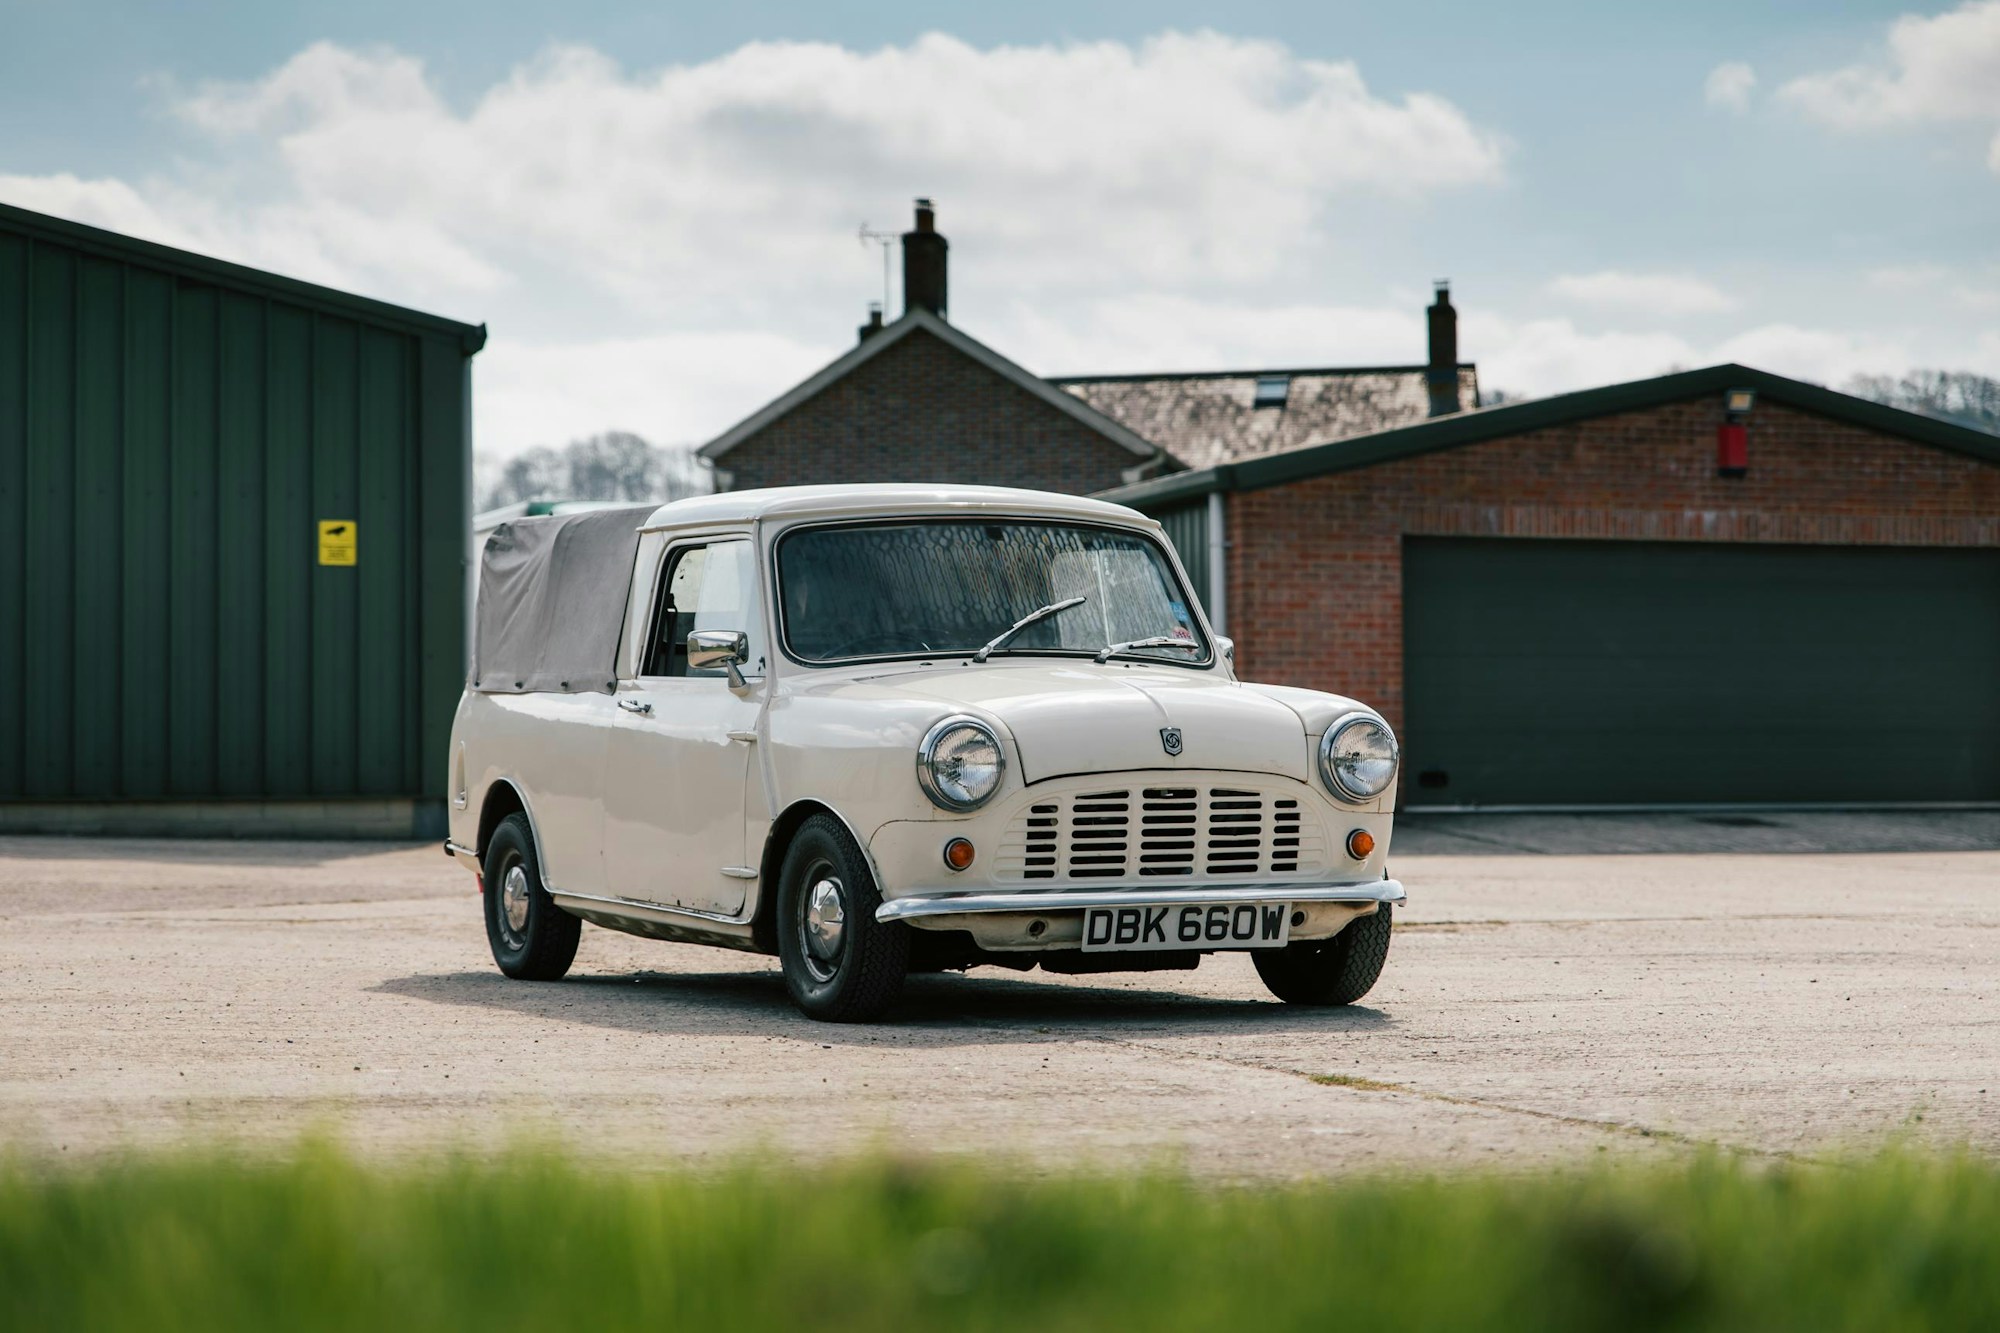 1980 AUSTIN MORRIS MINI 95 PICKUP for sale by auction in Swindon